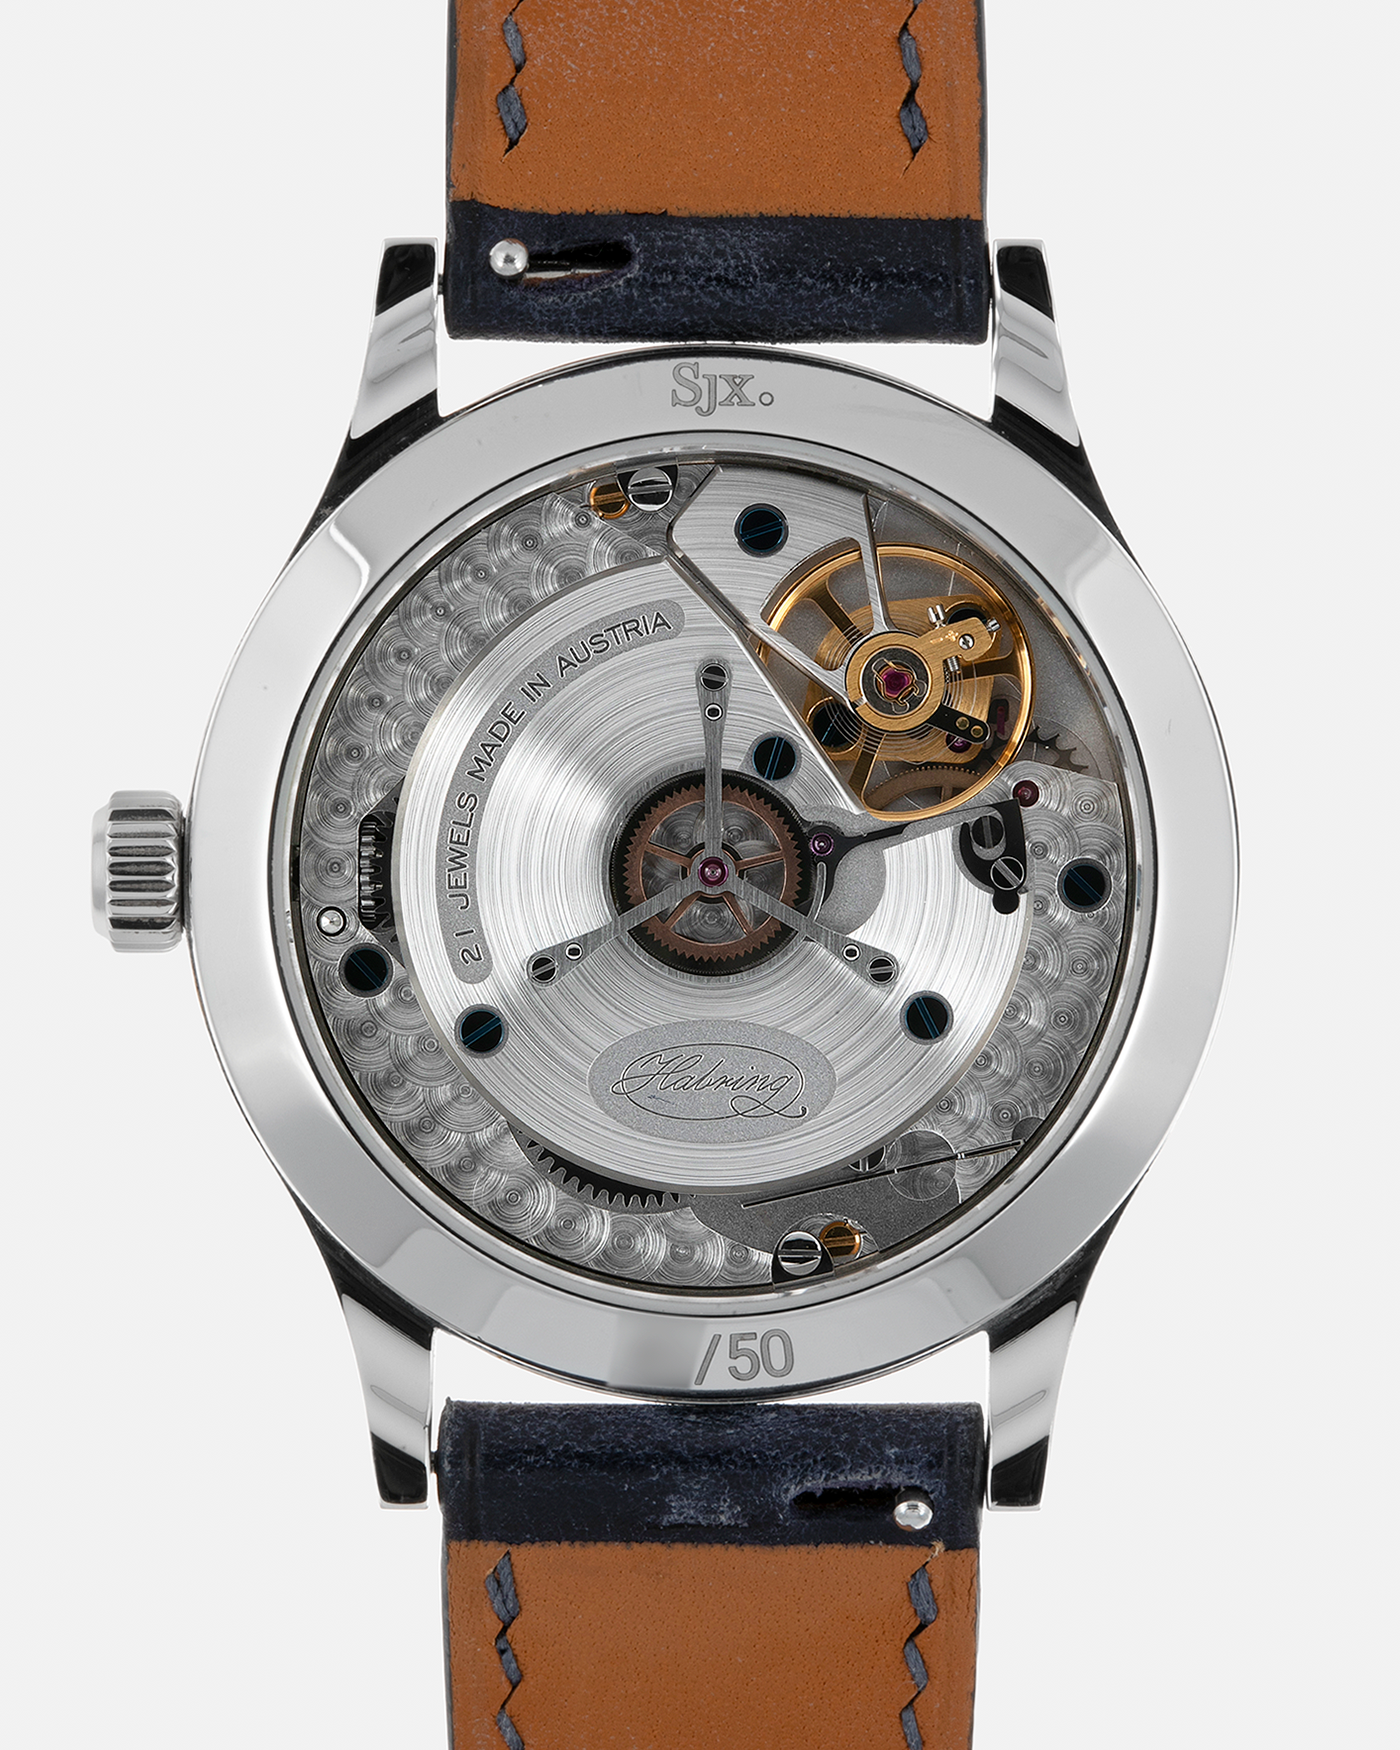 Brand: Habring² Model: Erwin “Star” SJX Edition One, Limited Edition of 50 Pieces Year: 2021 Material: Stainless Steel  Movement: Habring² Cal. A11s (Based on the Valjoux Cal. 7750), Manual-Winding Case Diameter: 38.5mm Lug Width: 20mm Strap: Habring² Blue Calf Strap and Stainless Steel Tang Buckle